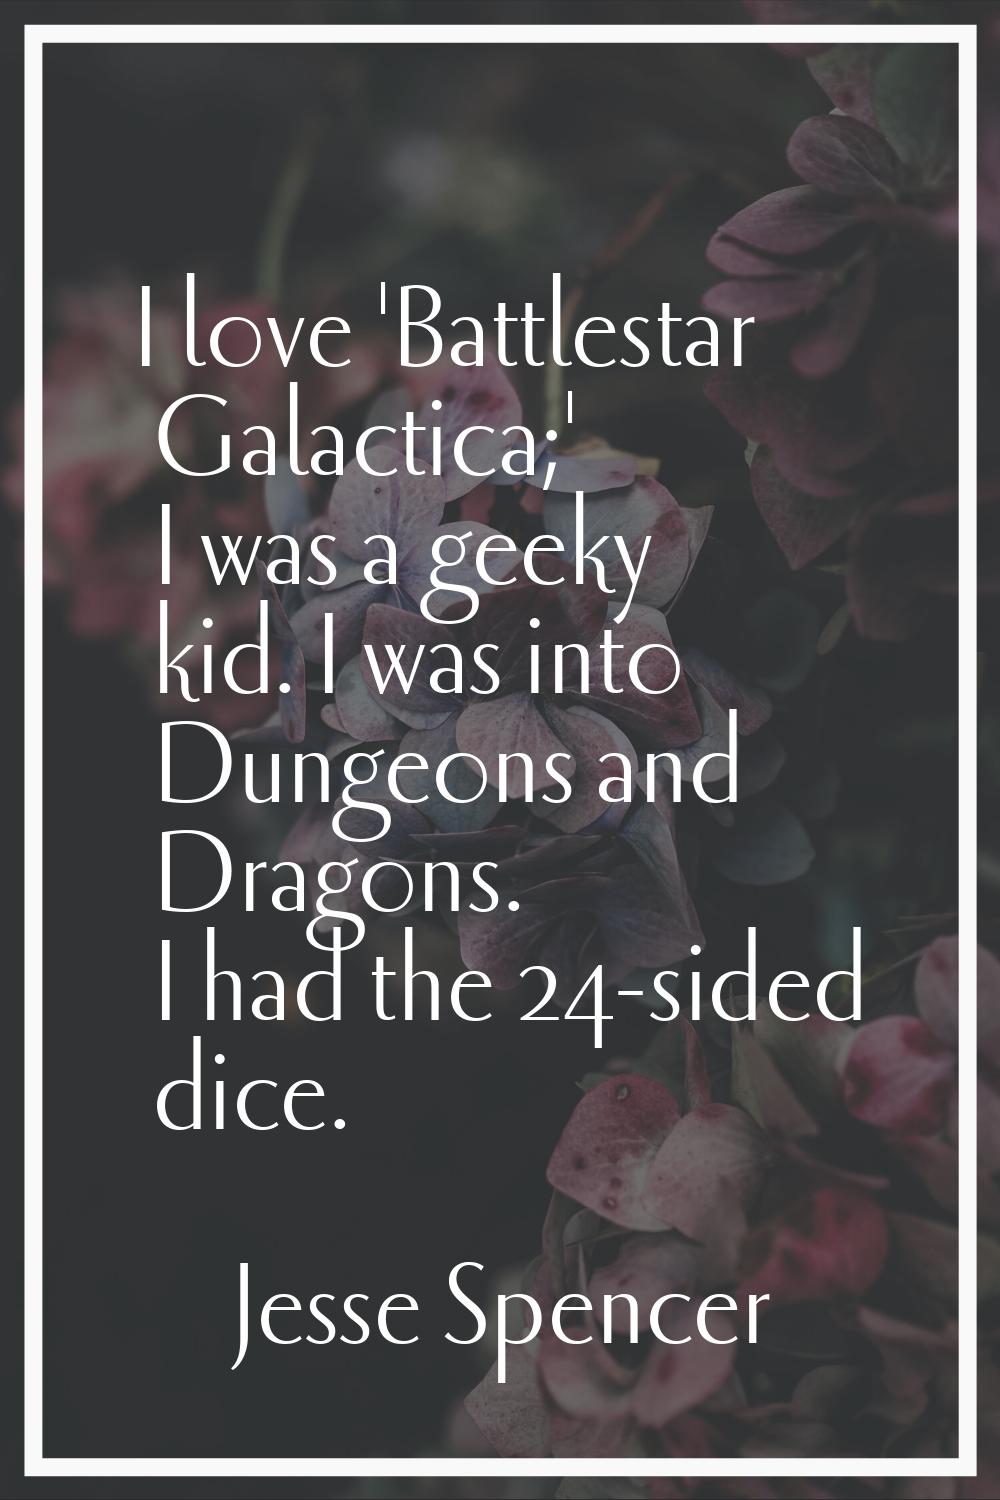 I love 'Battlestar Galactica;' I was a geeky kid. I was into Dungeons and Dragons. I had the 24-sid